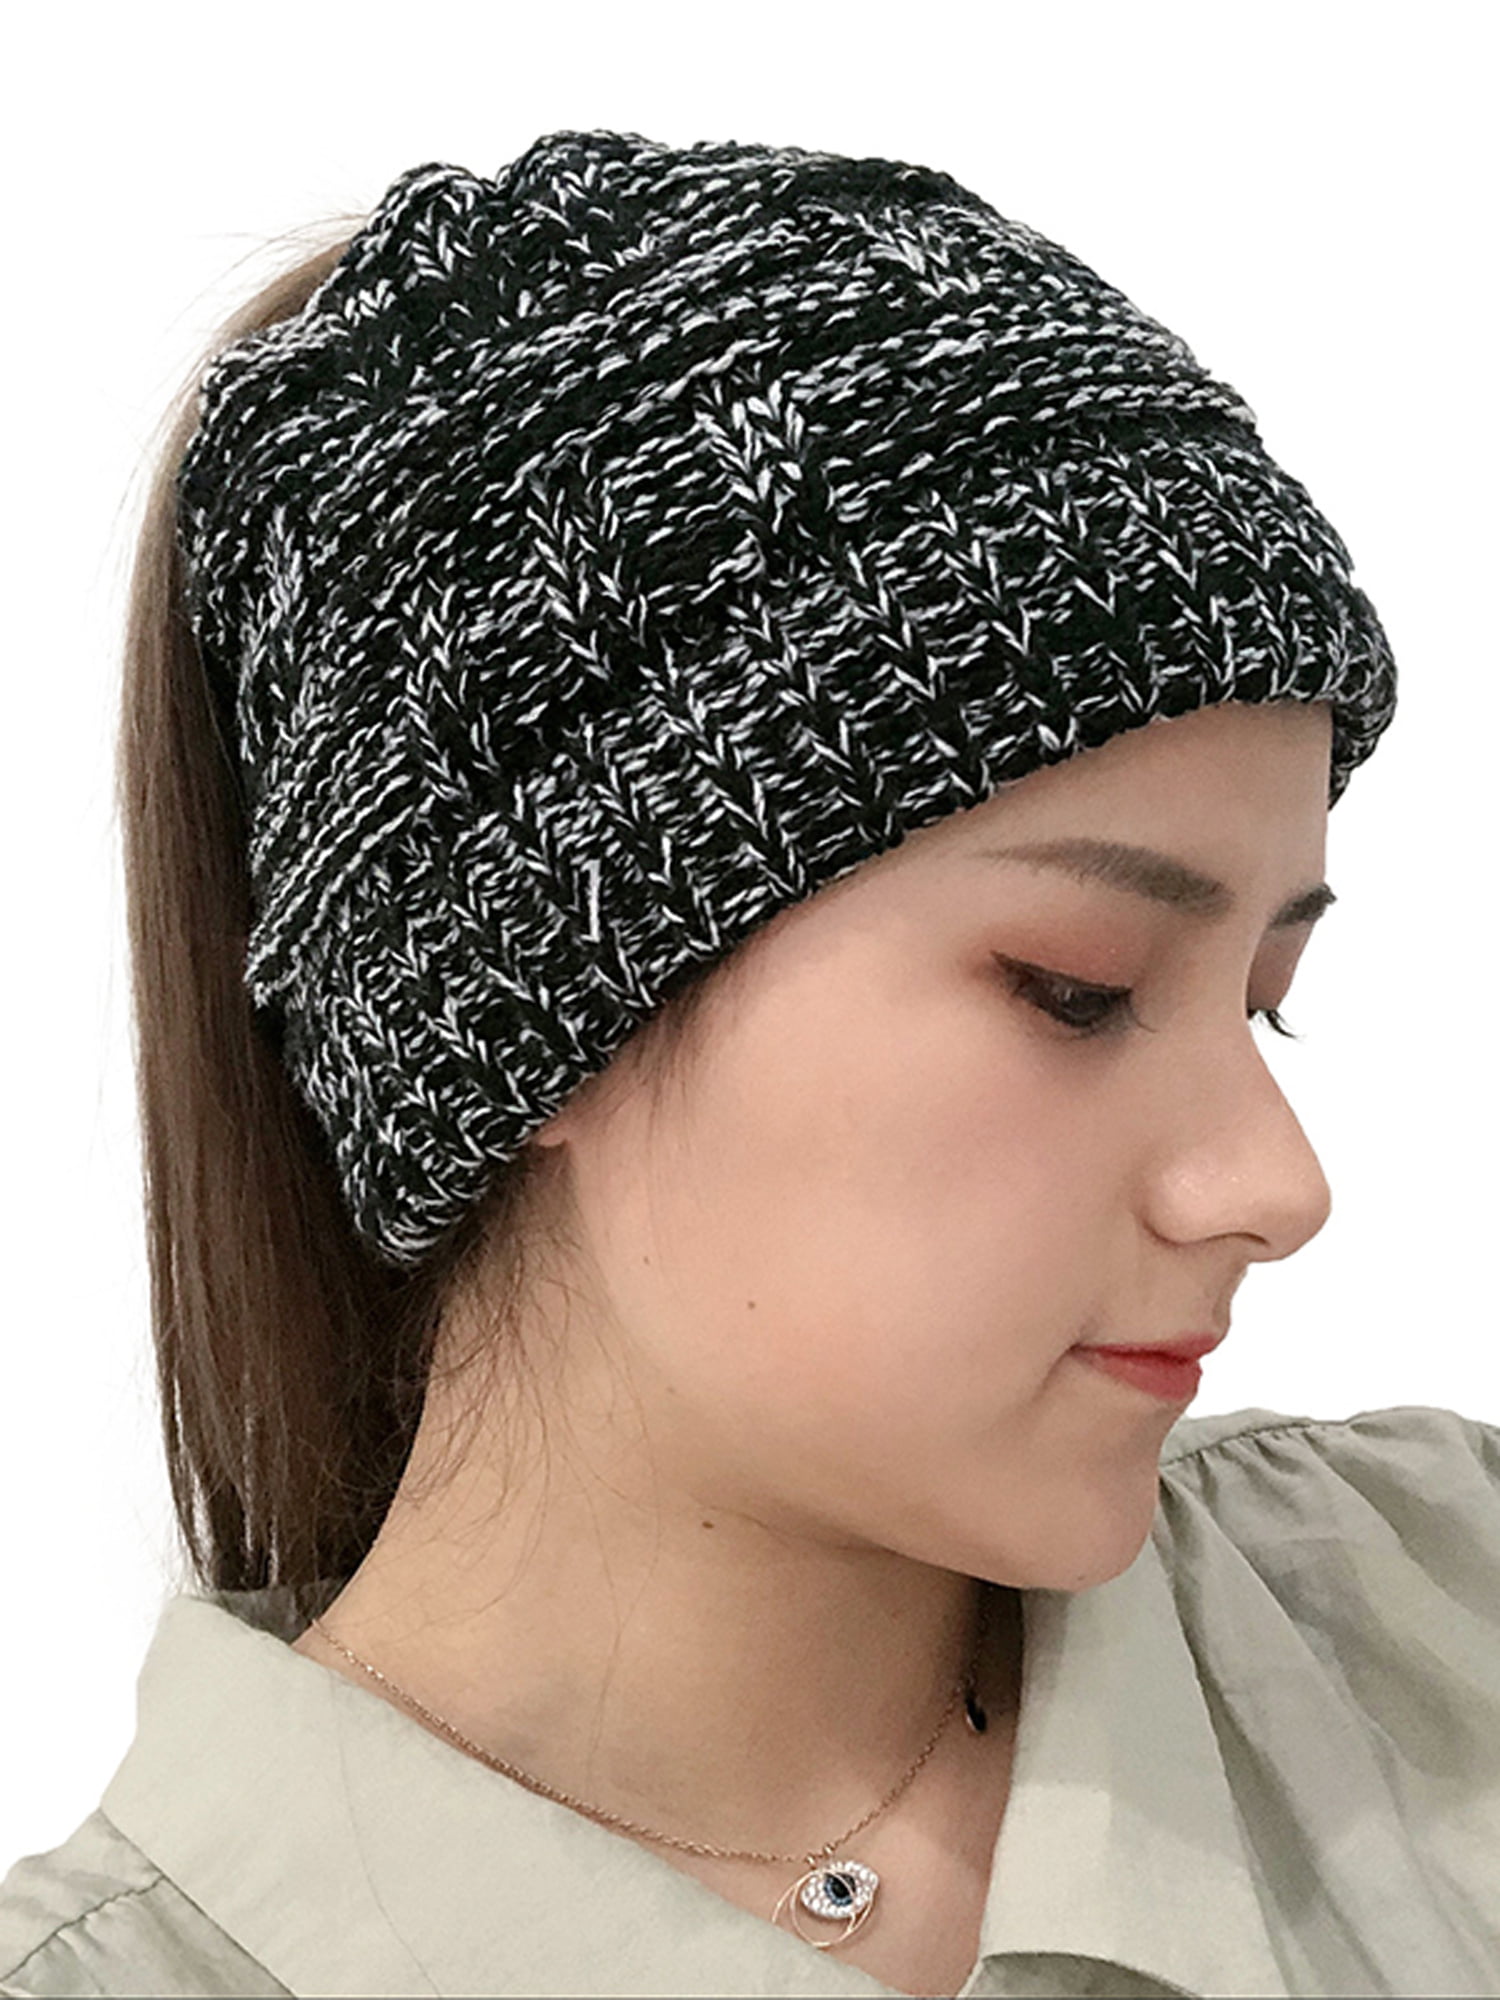 Ponytail Beanie Knit Infinity Scarf Set Womens/Girls Fuzzy Lined Messy High Bun Cap Circle Scarves 